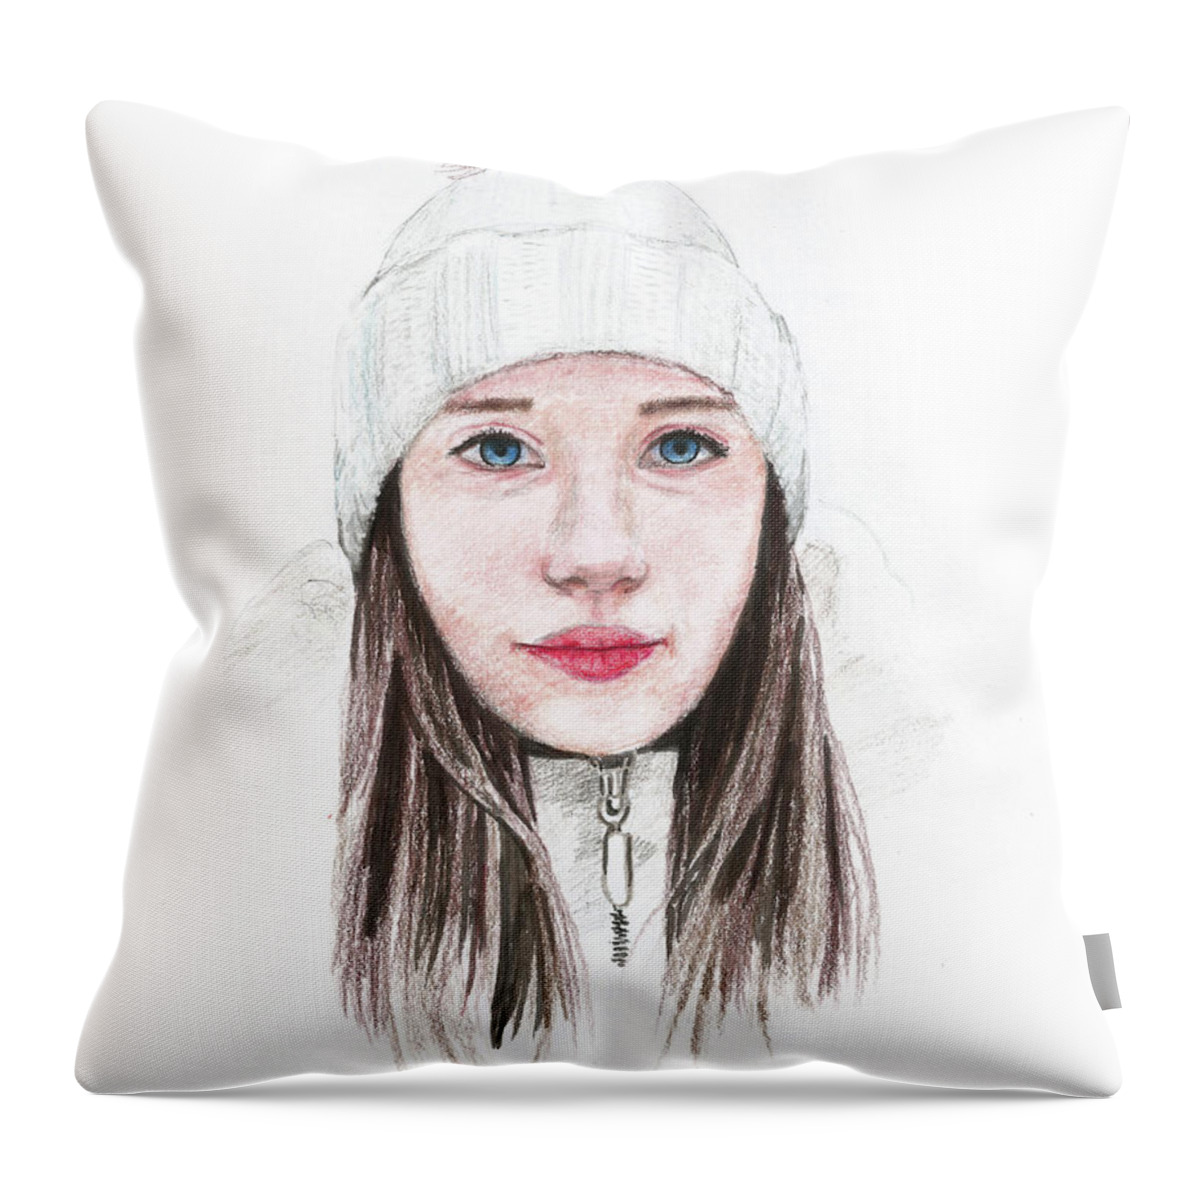 Winter Throw Pillow featuring the drawing A Winter Girl by Masha Batkova